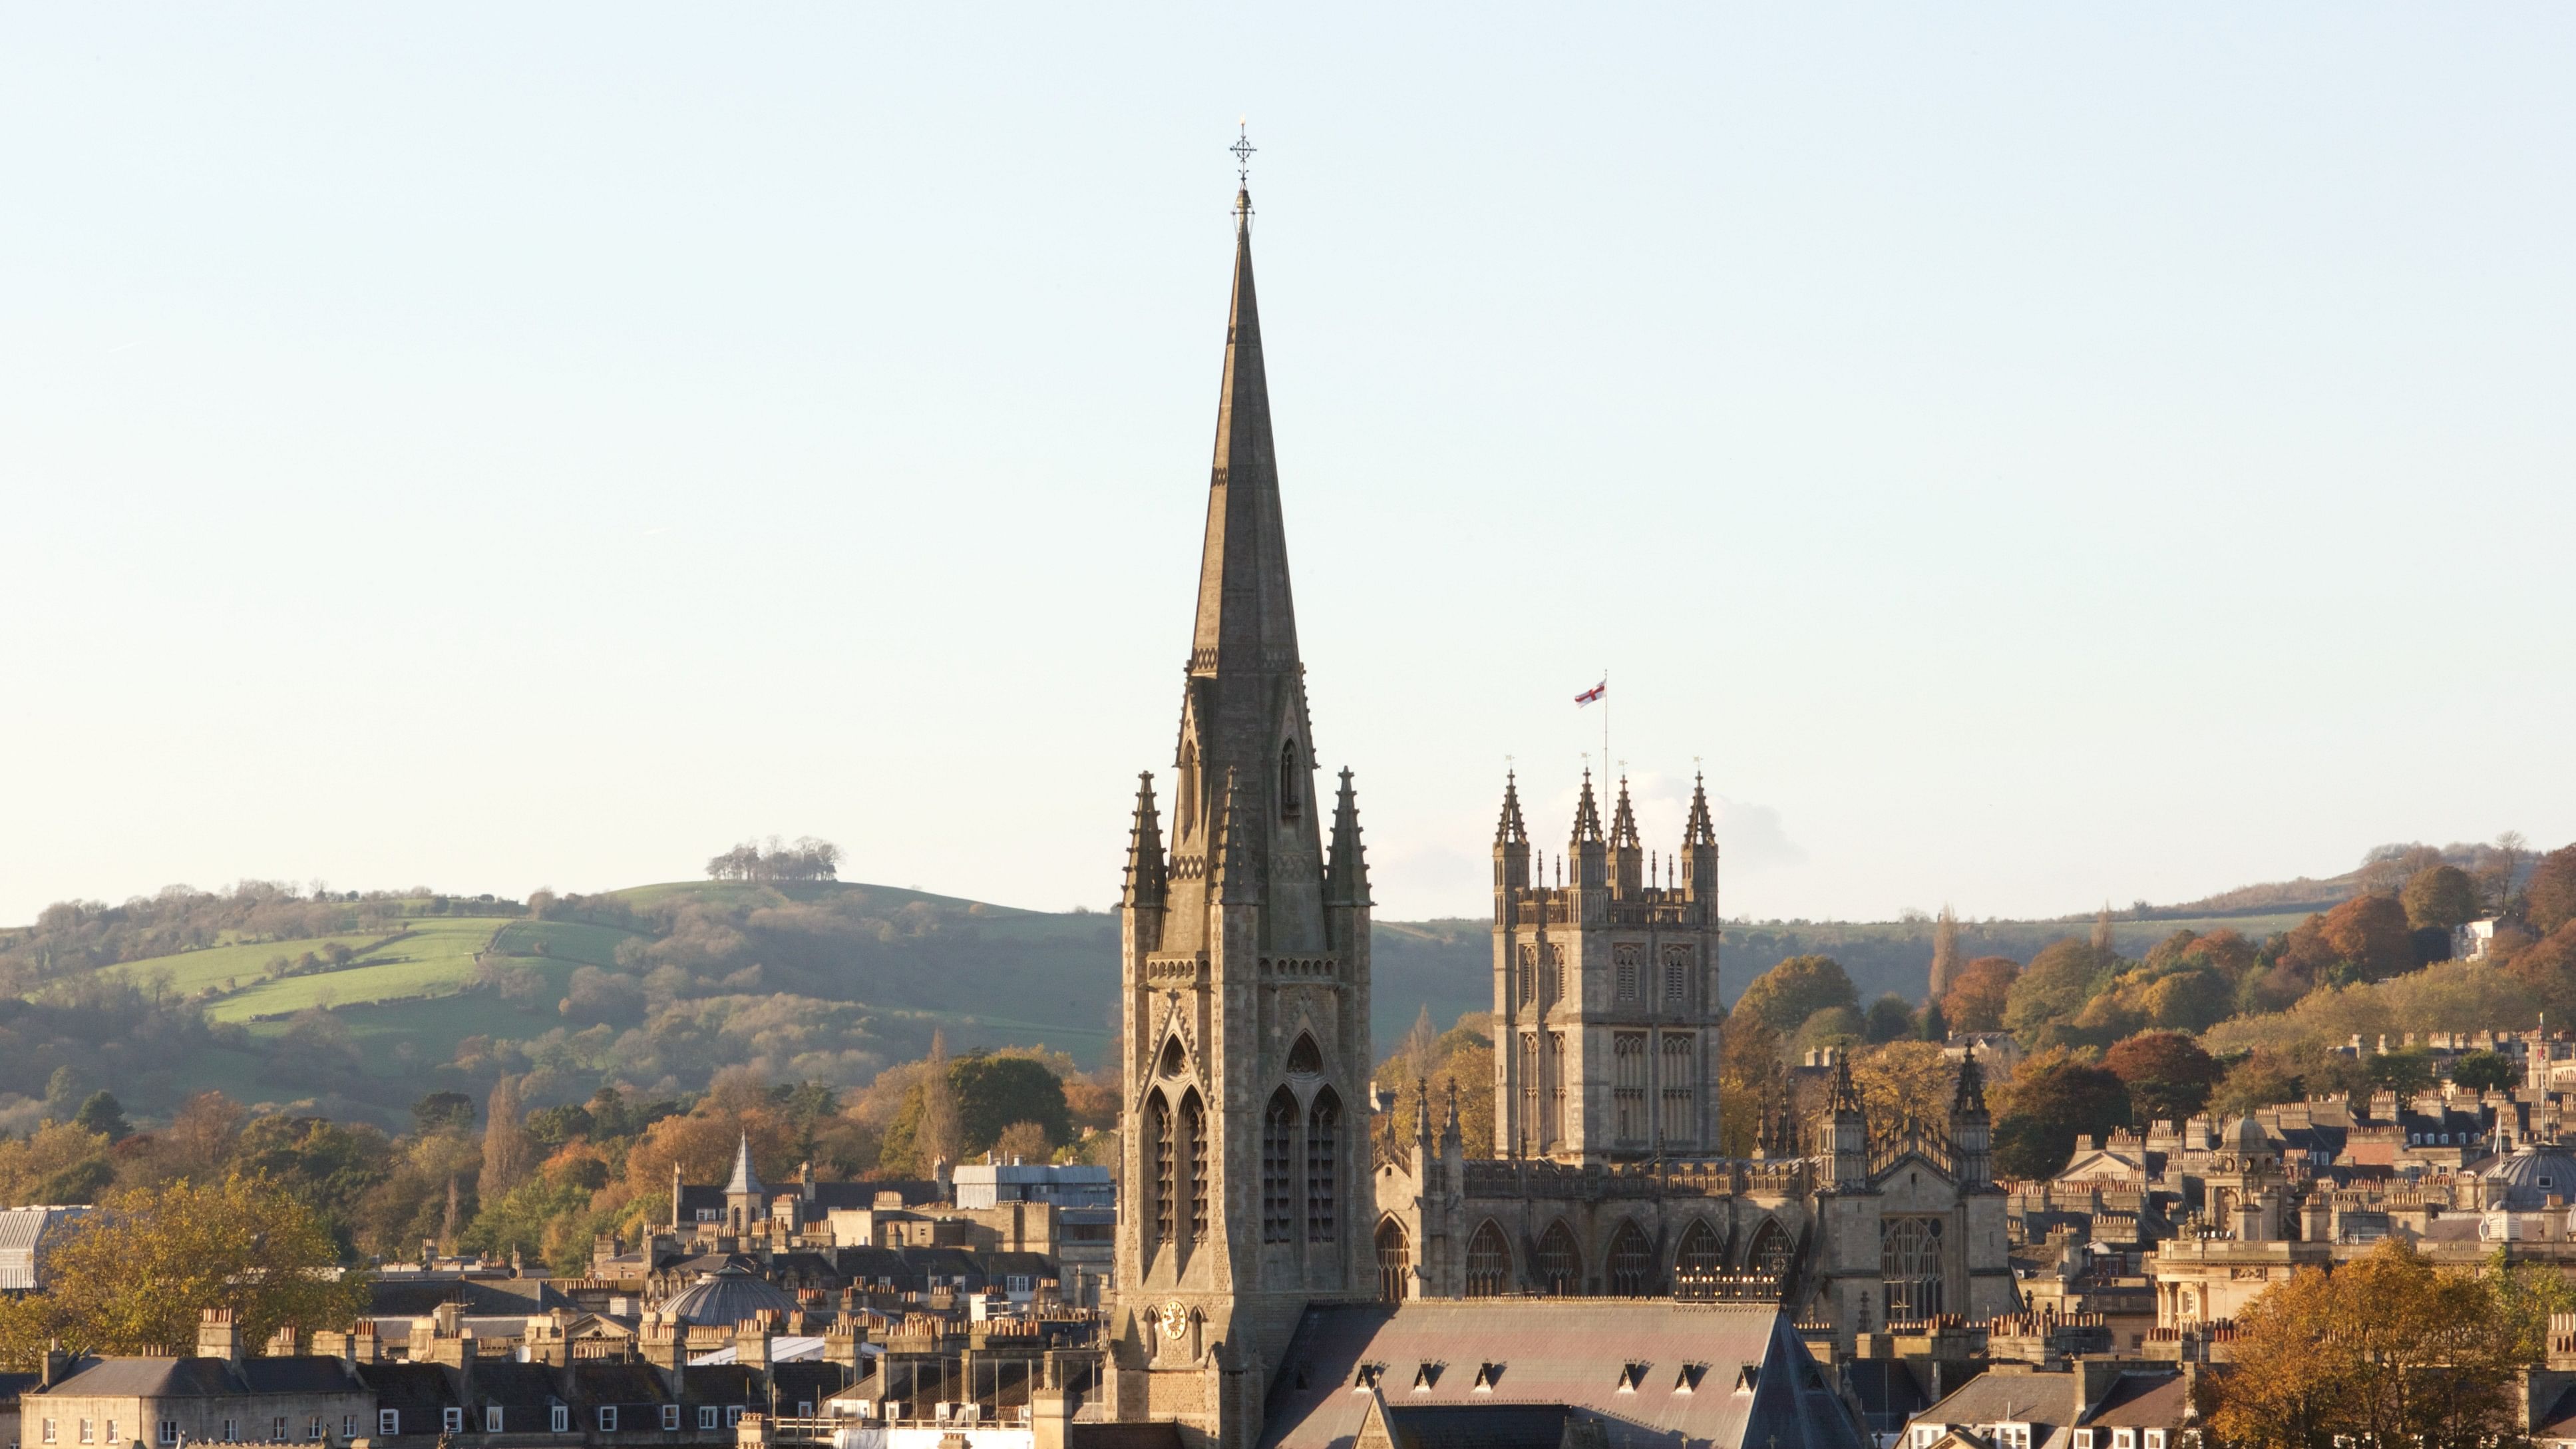 Bath, situated in the ceremonial county of Somerset, England, is known for and named after its Roman-built baths. Image courtesy Bath BID